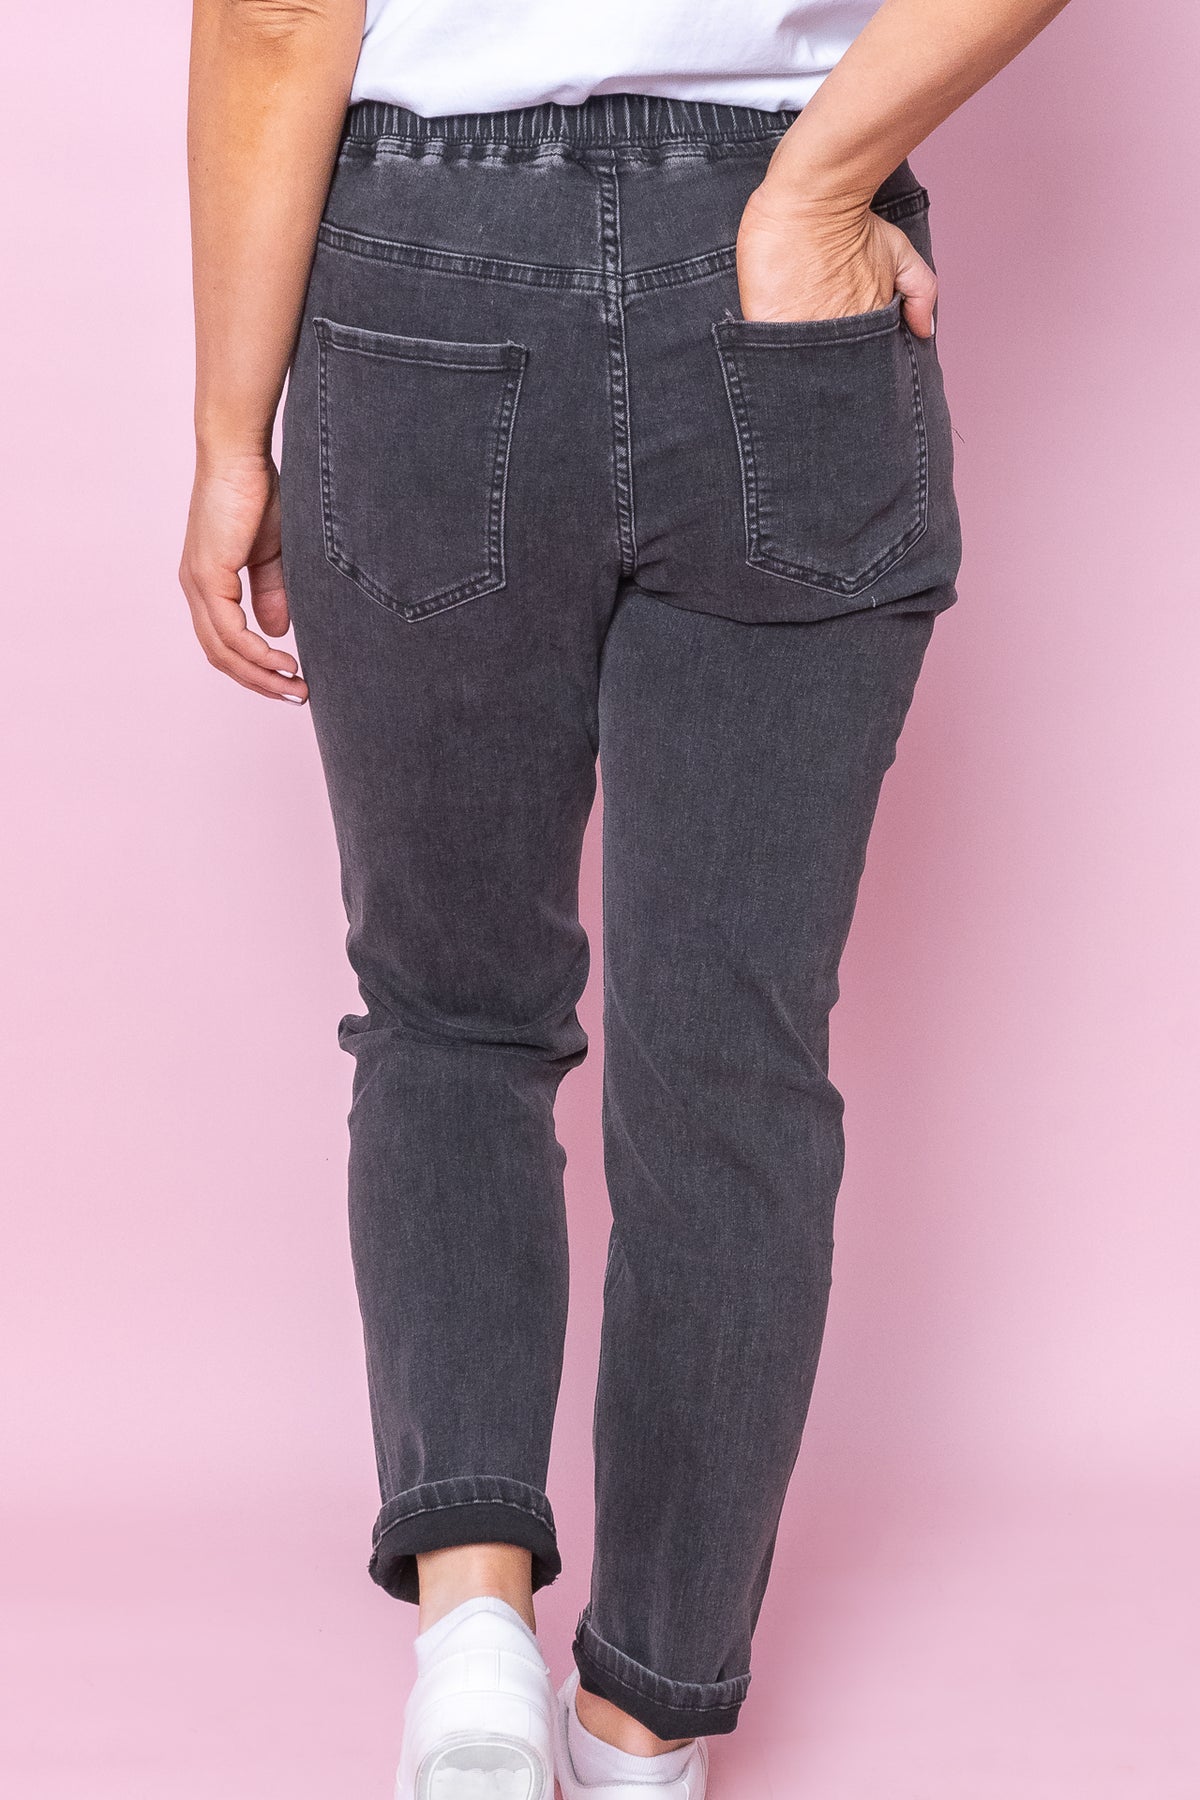 Juliette Joggers in Washed Black - Foxwood